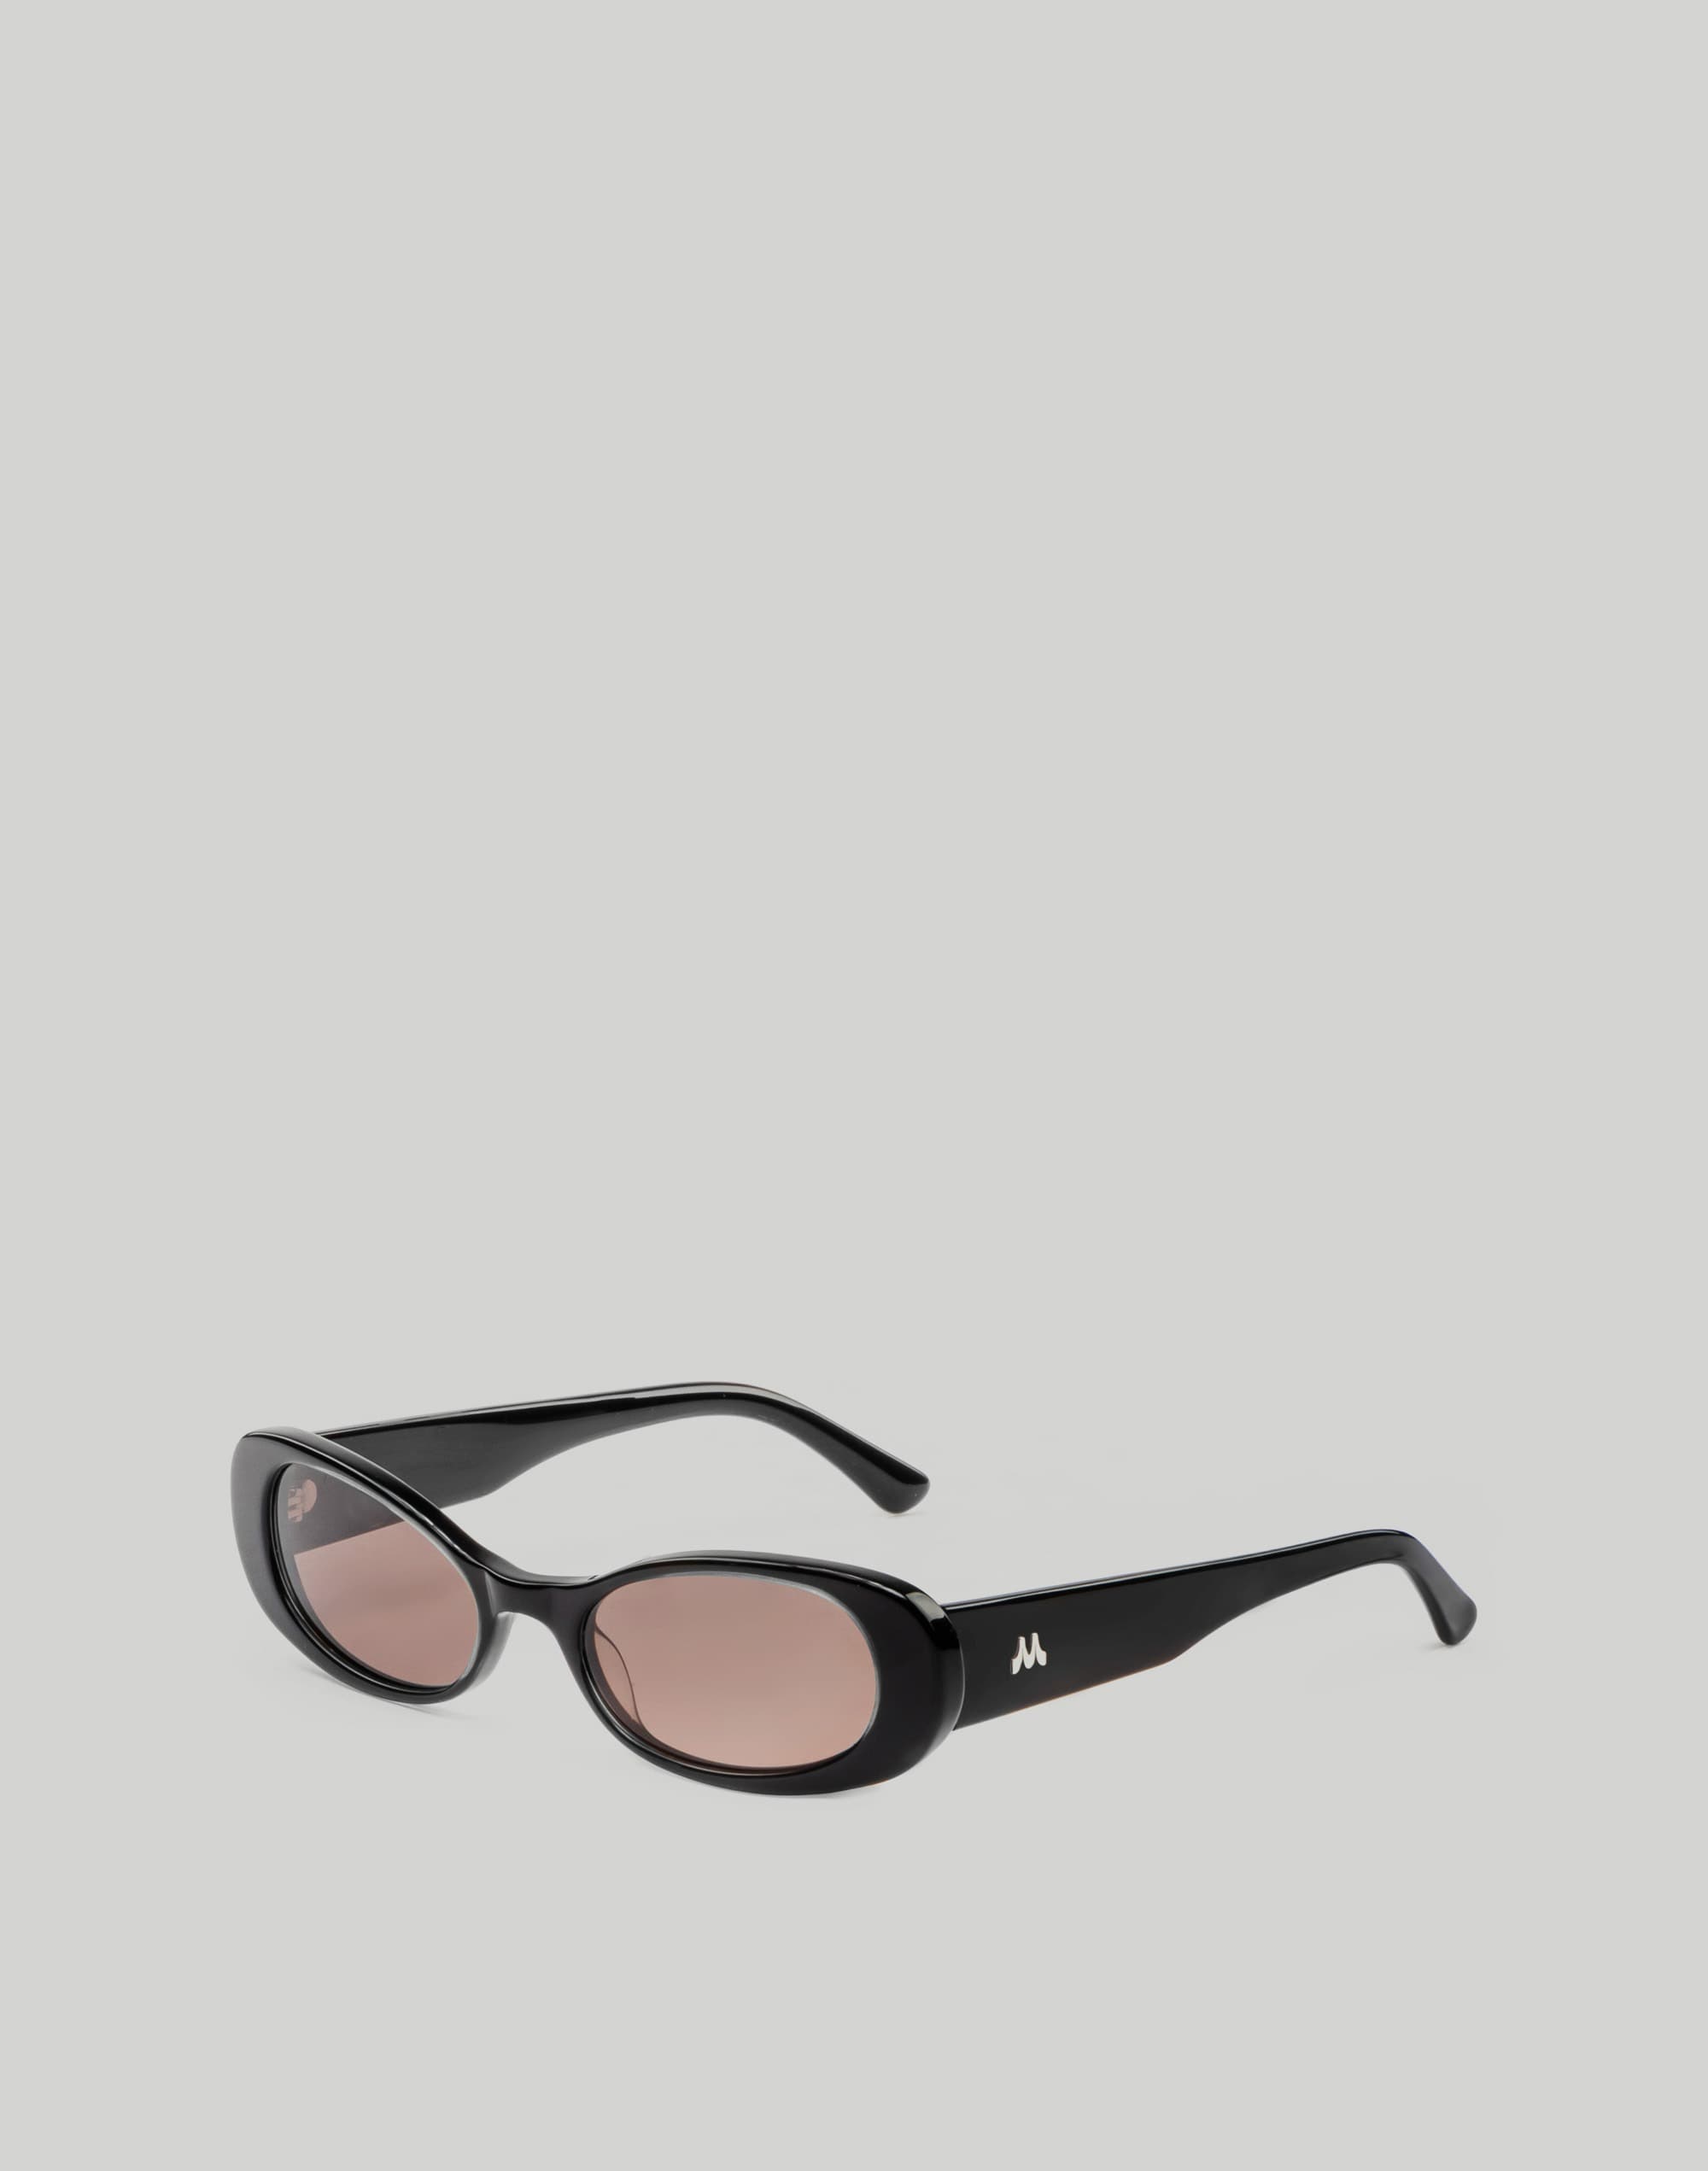 Maguire Brooklyn Sunglasses in